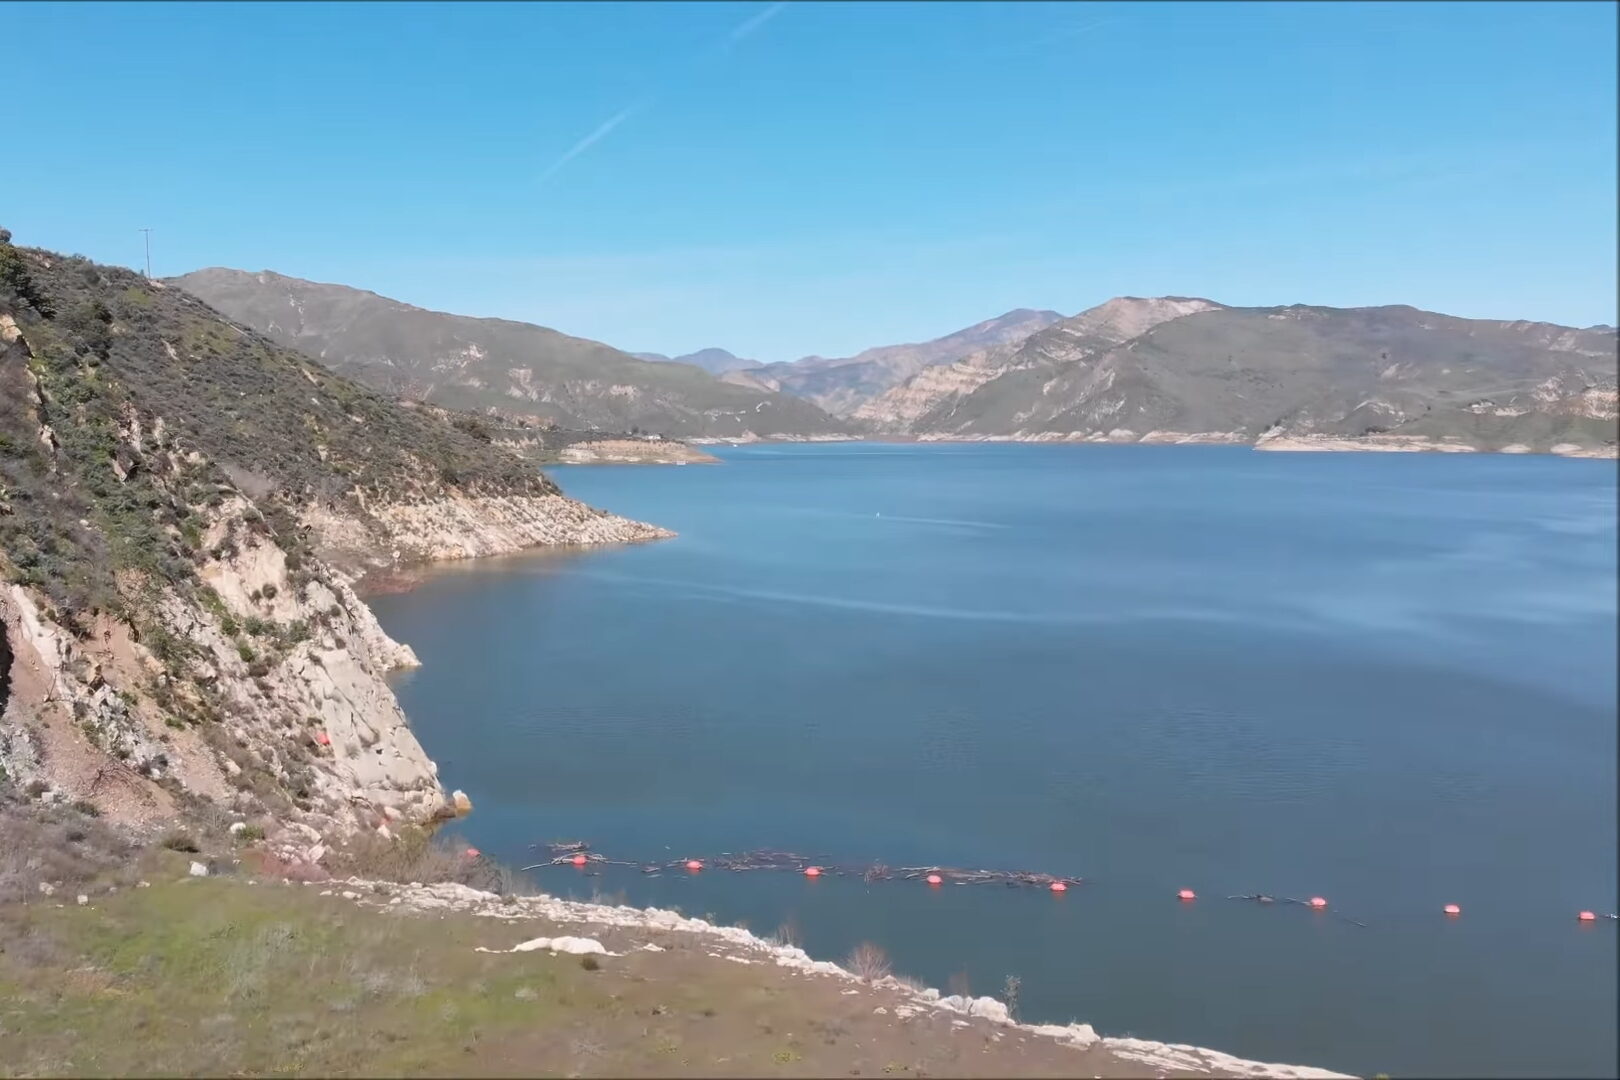 Lake Piru Camping Guide: Hours, Reservations, Swimming, and More